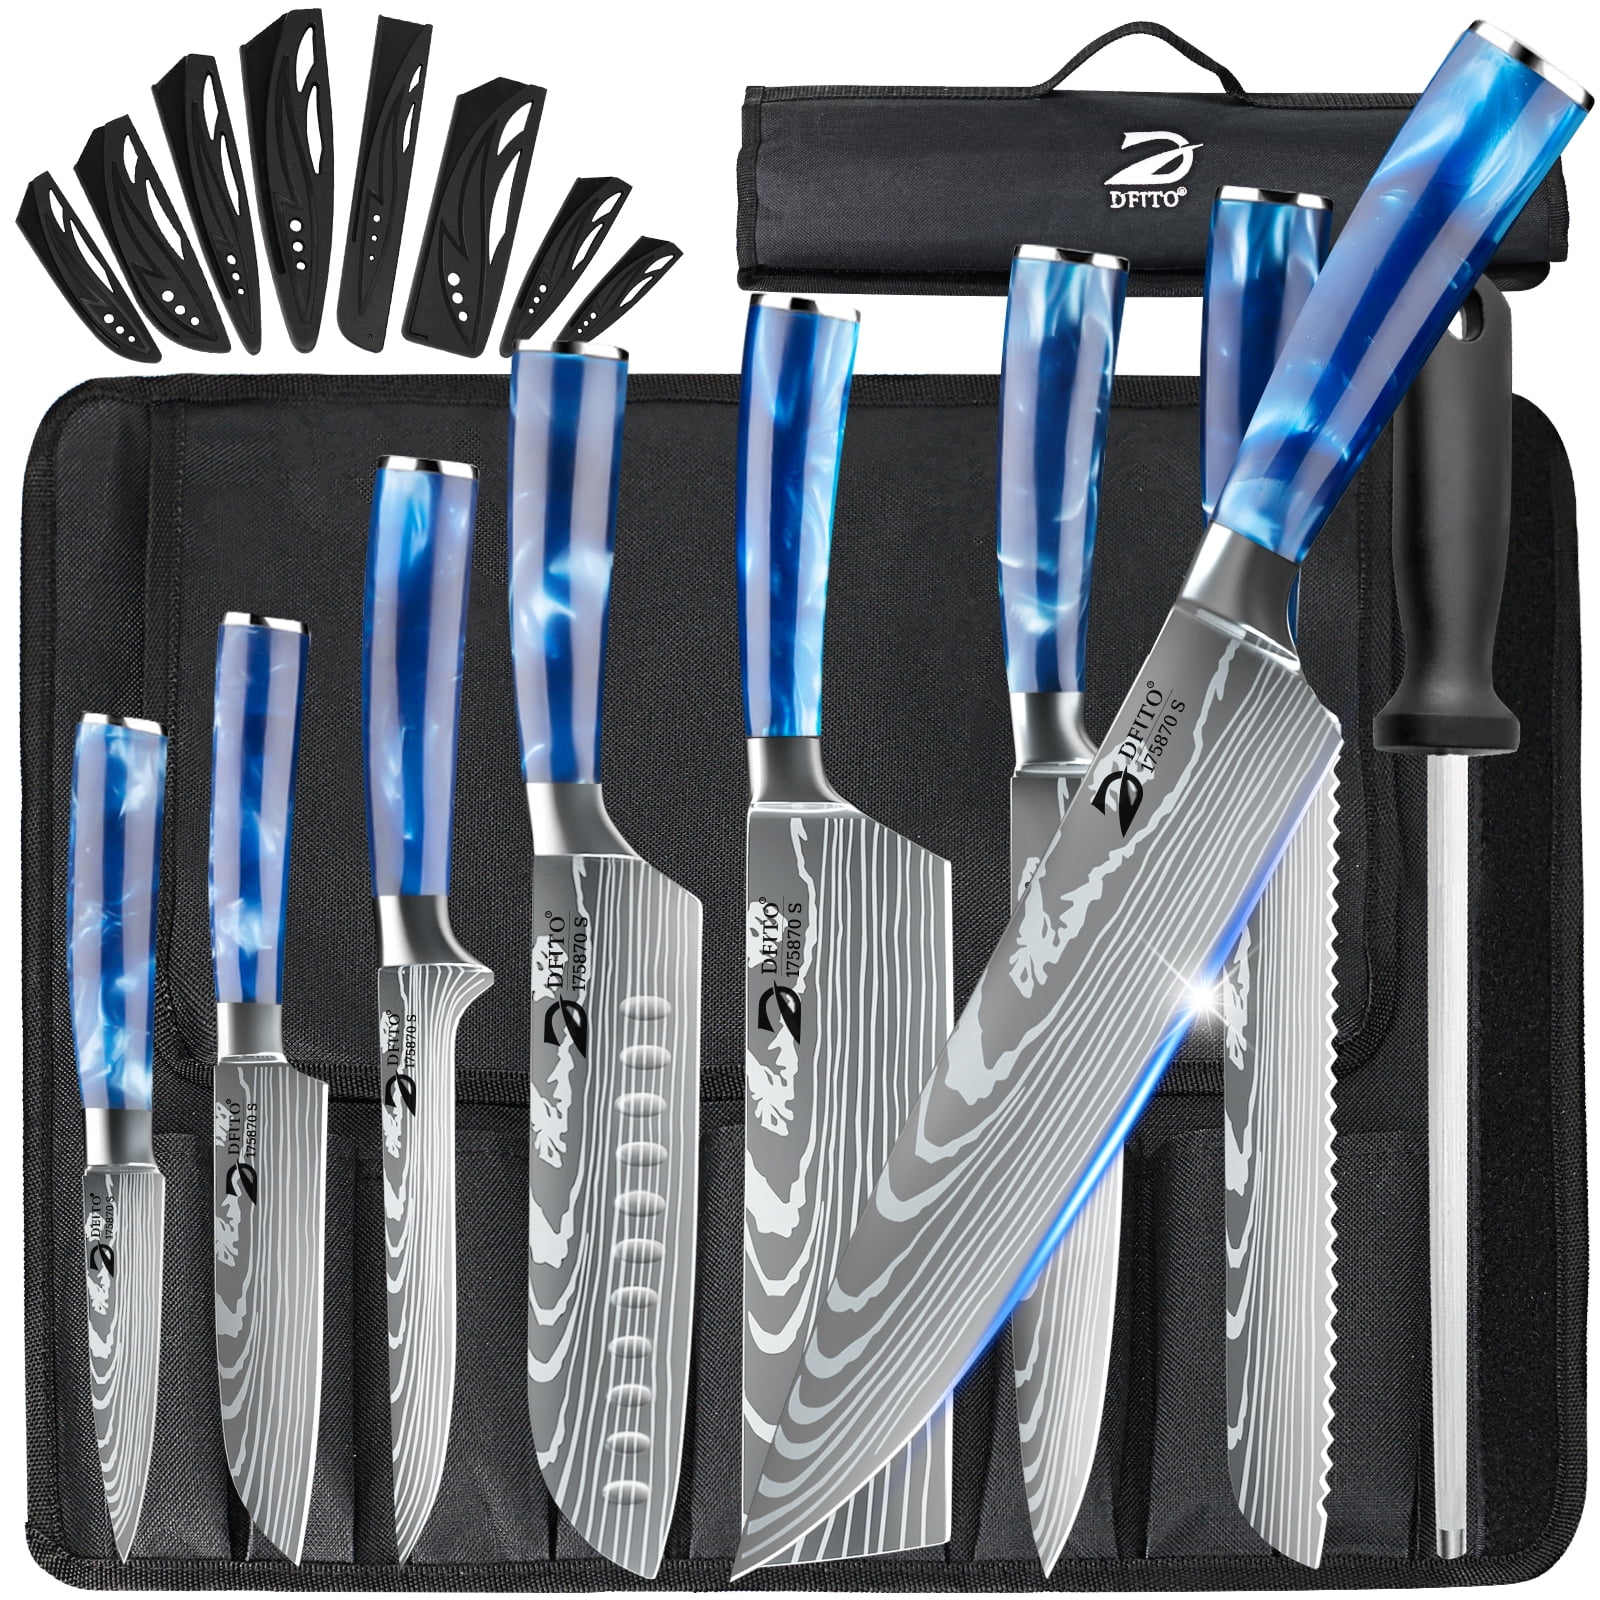 Kitchen Knife Set 7-Piece Knife Sets for Kitchen with Block, Sharp Stainless Steel Professional Chef Knives Set, Best Gift for Women (Blue)